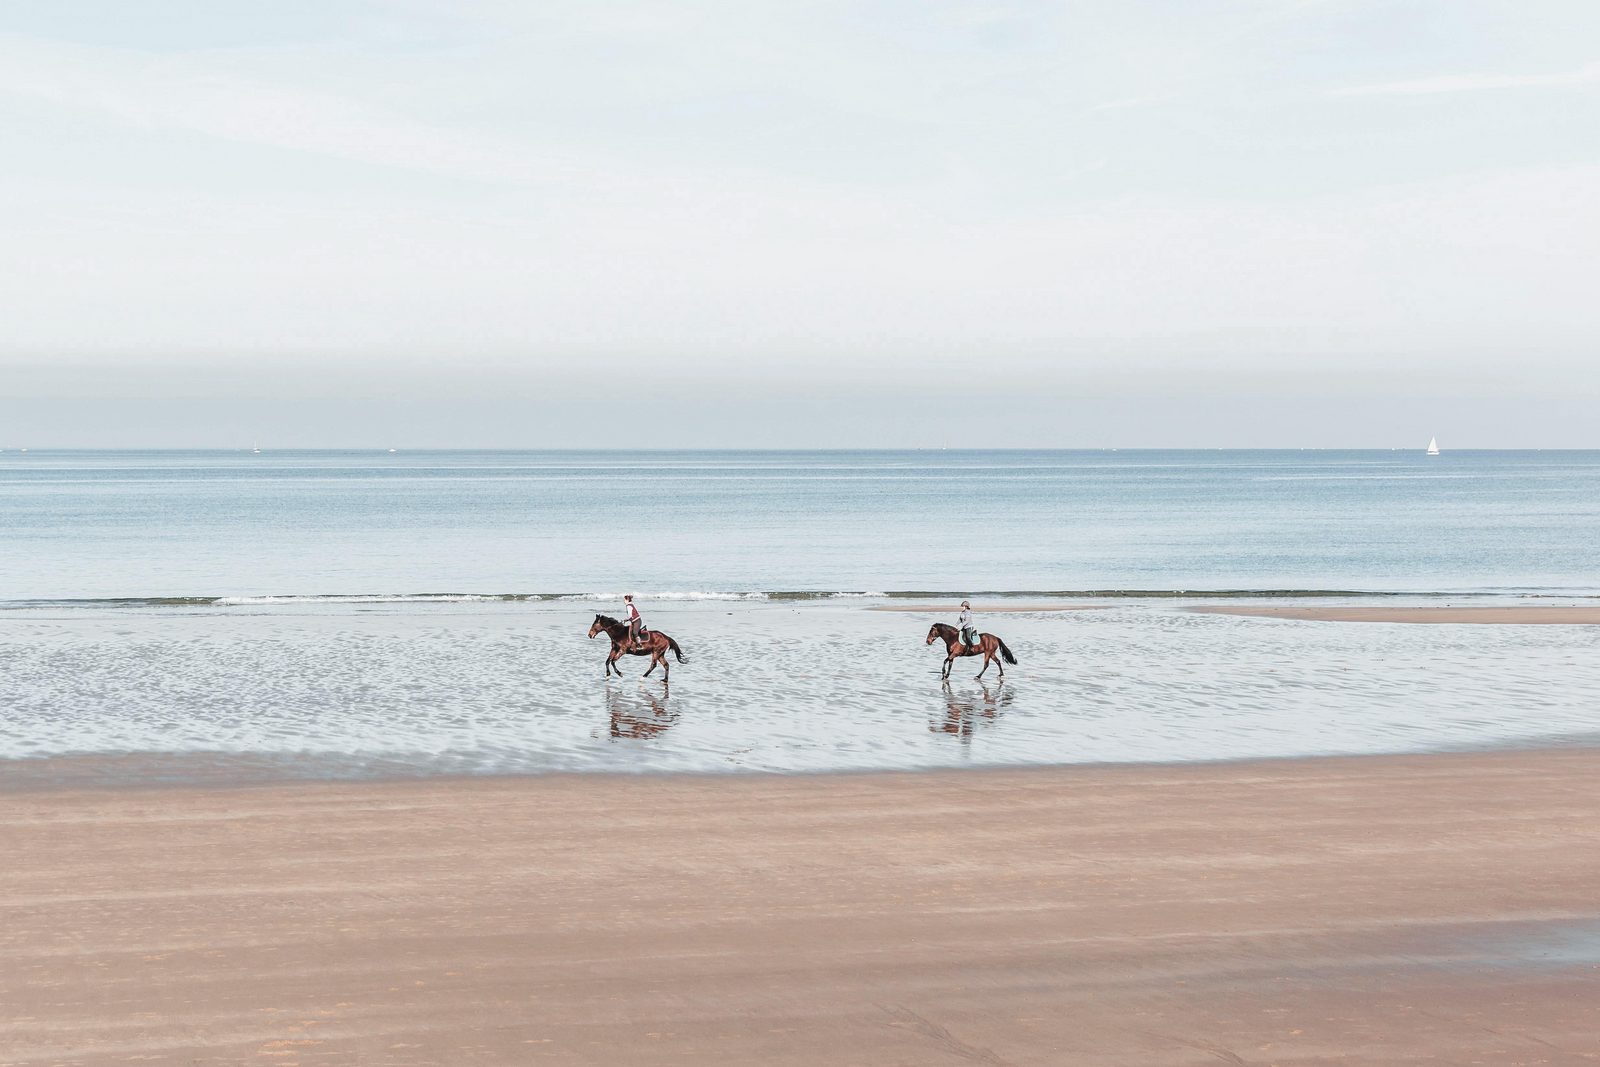 Horse riding at the beach in Zeeland